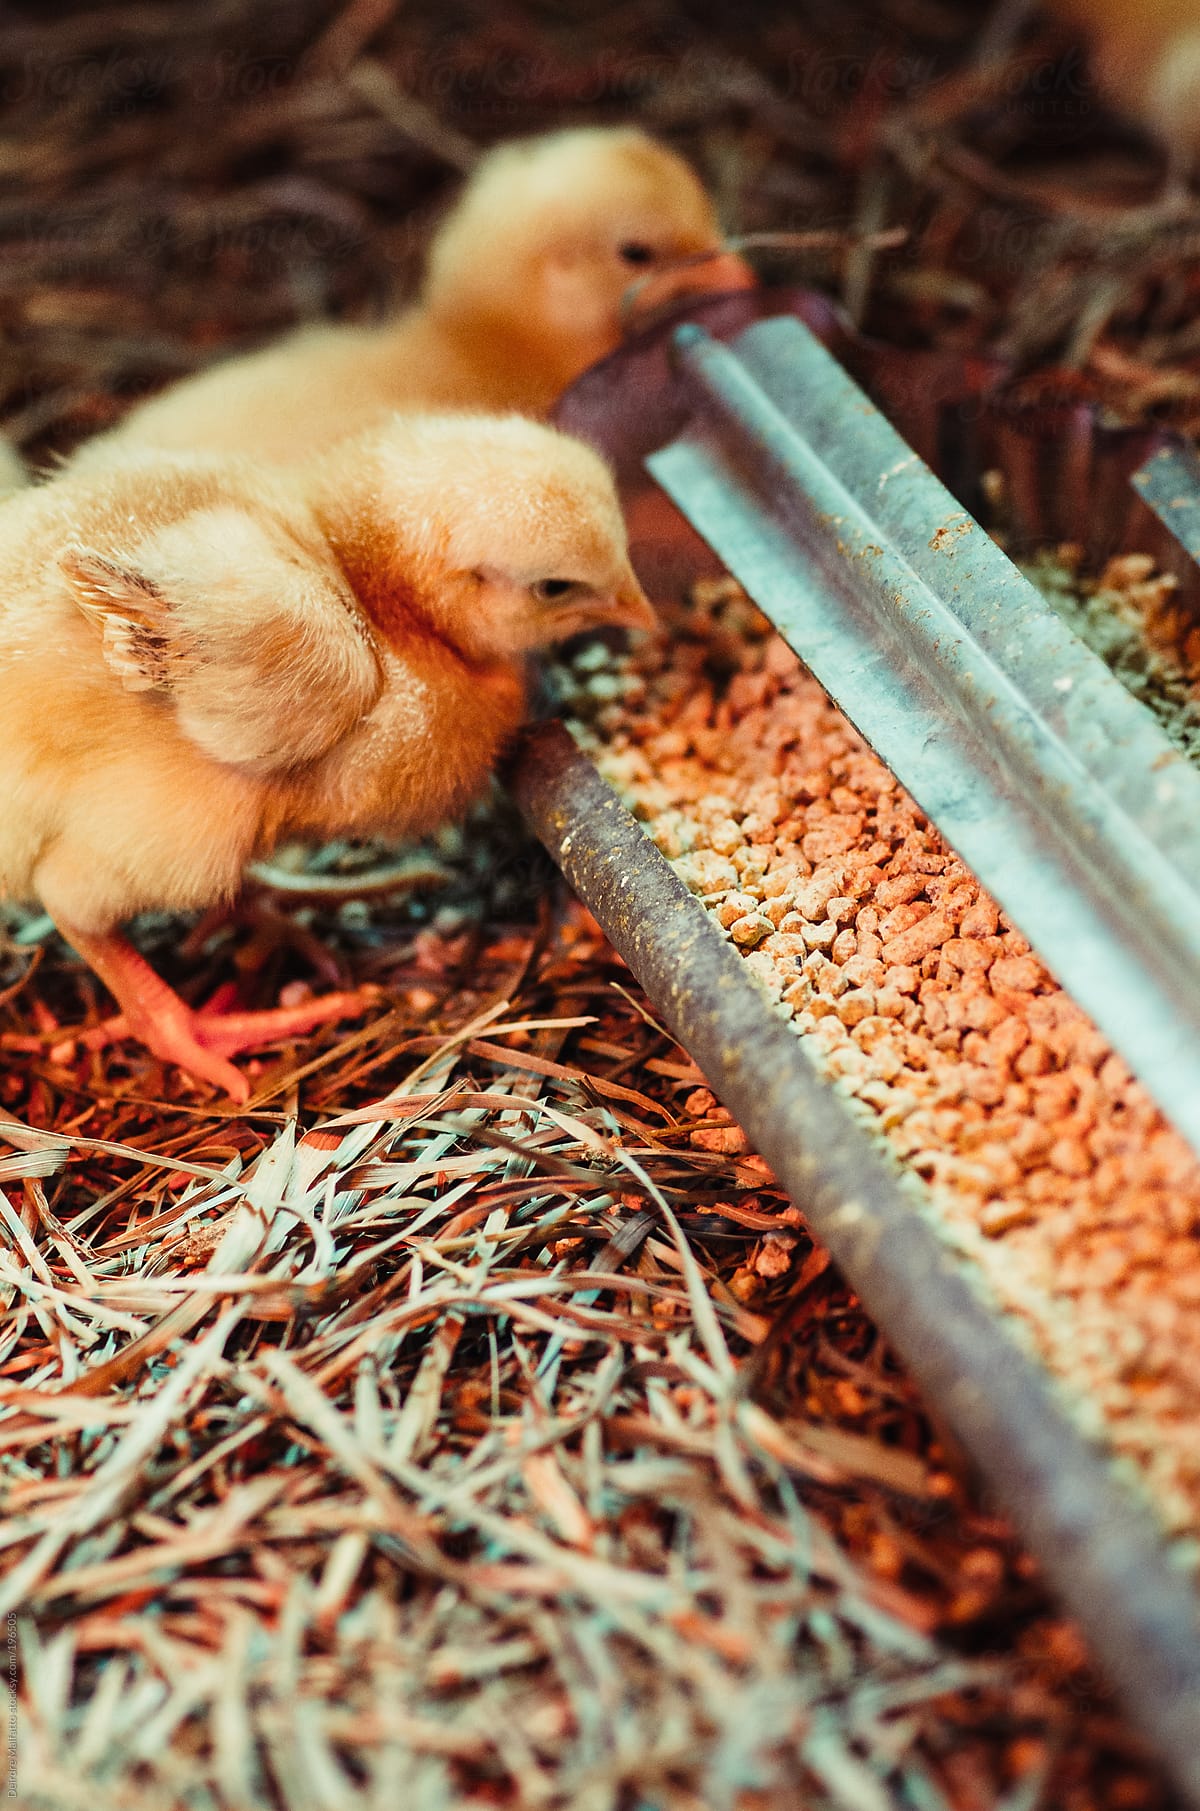 baby chicks eating from a feed trough